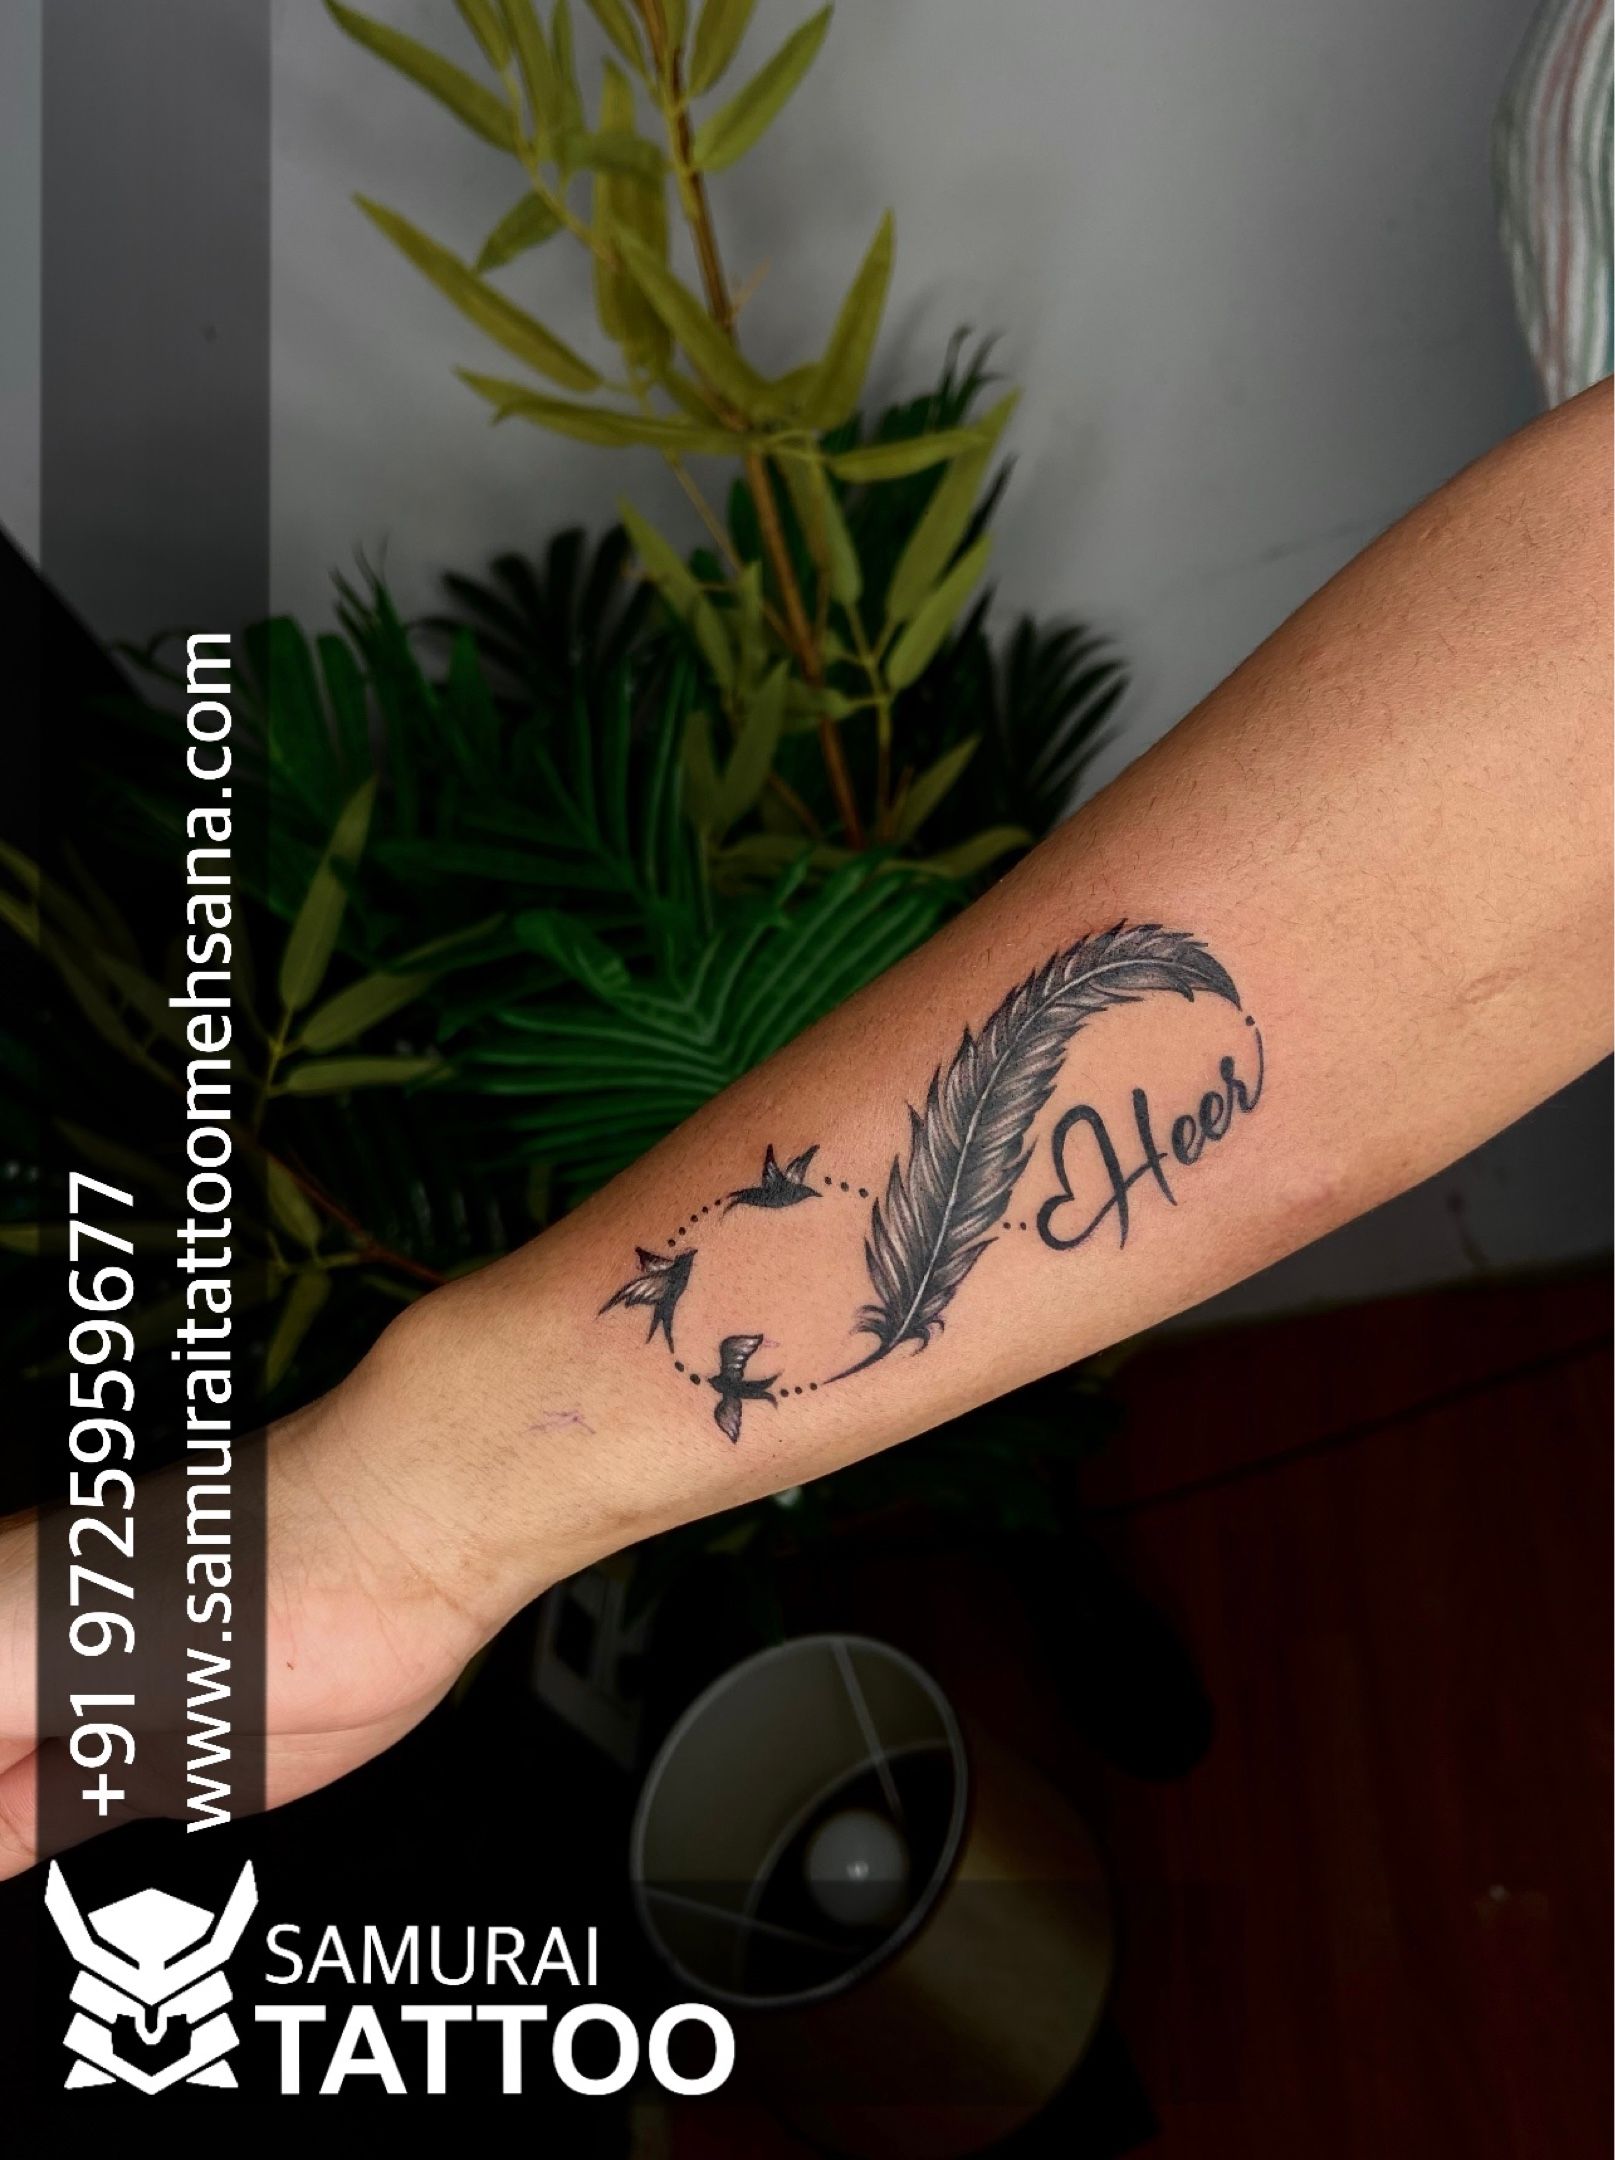 Cnavasarts - Name tattoos identified love and the best feeling to show love  with tattoos Artist - Anish Kumar (@canvasarttattoo ) at canvas art tattoo  INDIA🇨🇮 #nametattoos #tattoostyle #namelovetattoo #uniquefontstyletattoo  #artistanish #artistkhushboo #